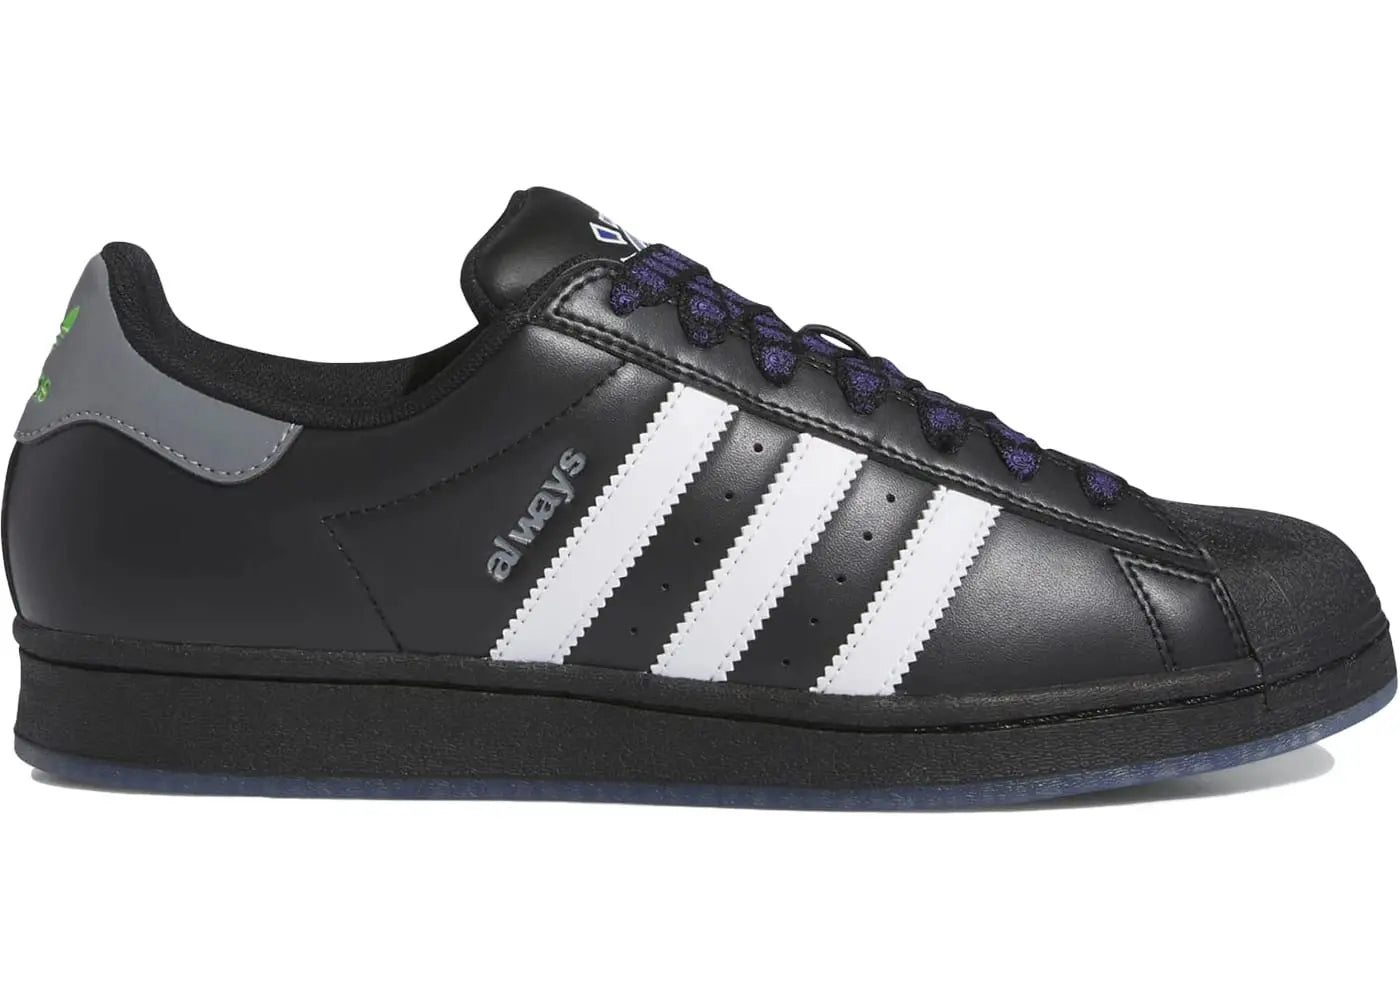 adidas Superstar ADV Always Core Black in Auckland, New Zealand - Shop name